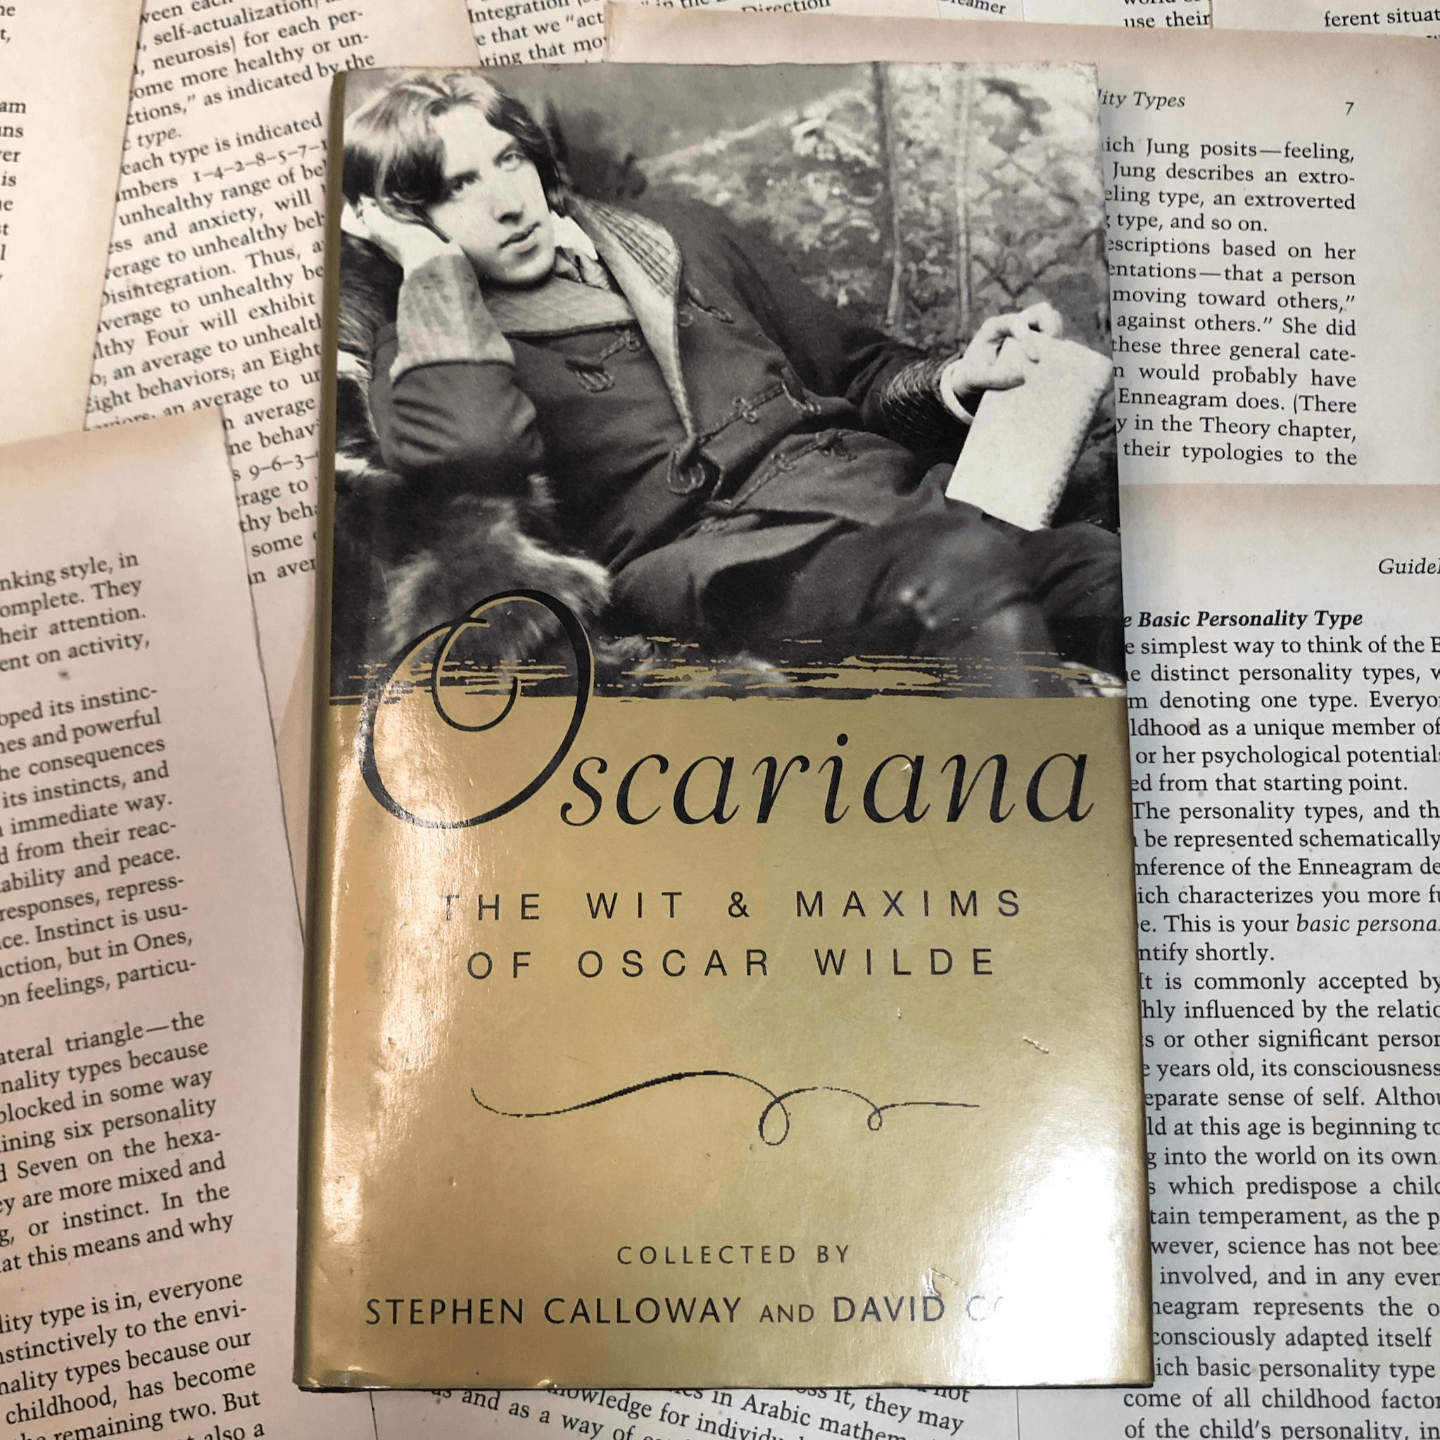 Oscariana - The Wit and Maxims of Oscar Wilde by Stephen Colloway and David Colvin [Hardcover]